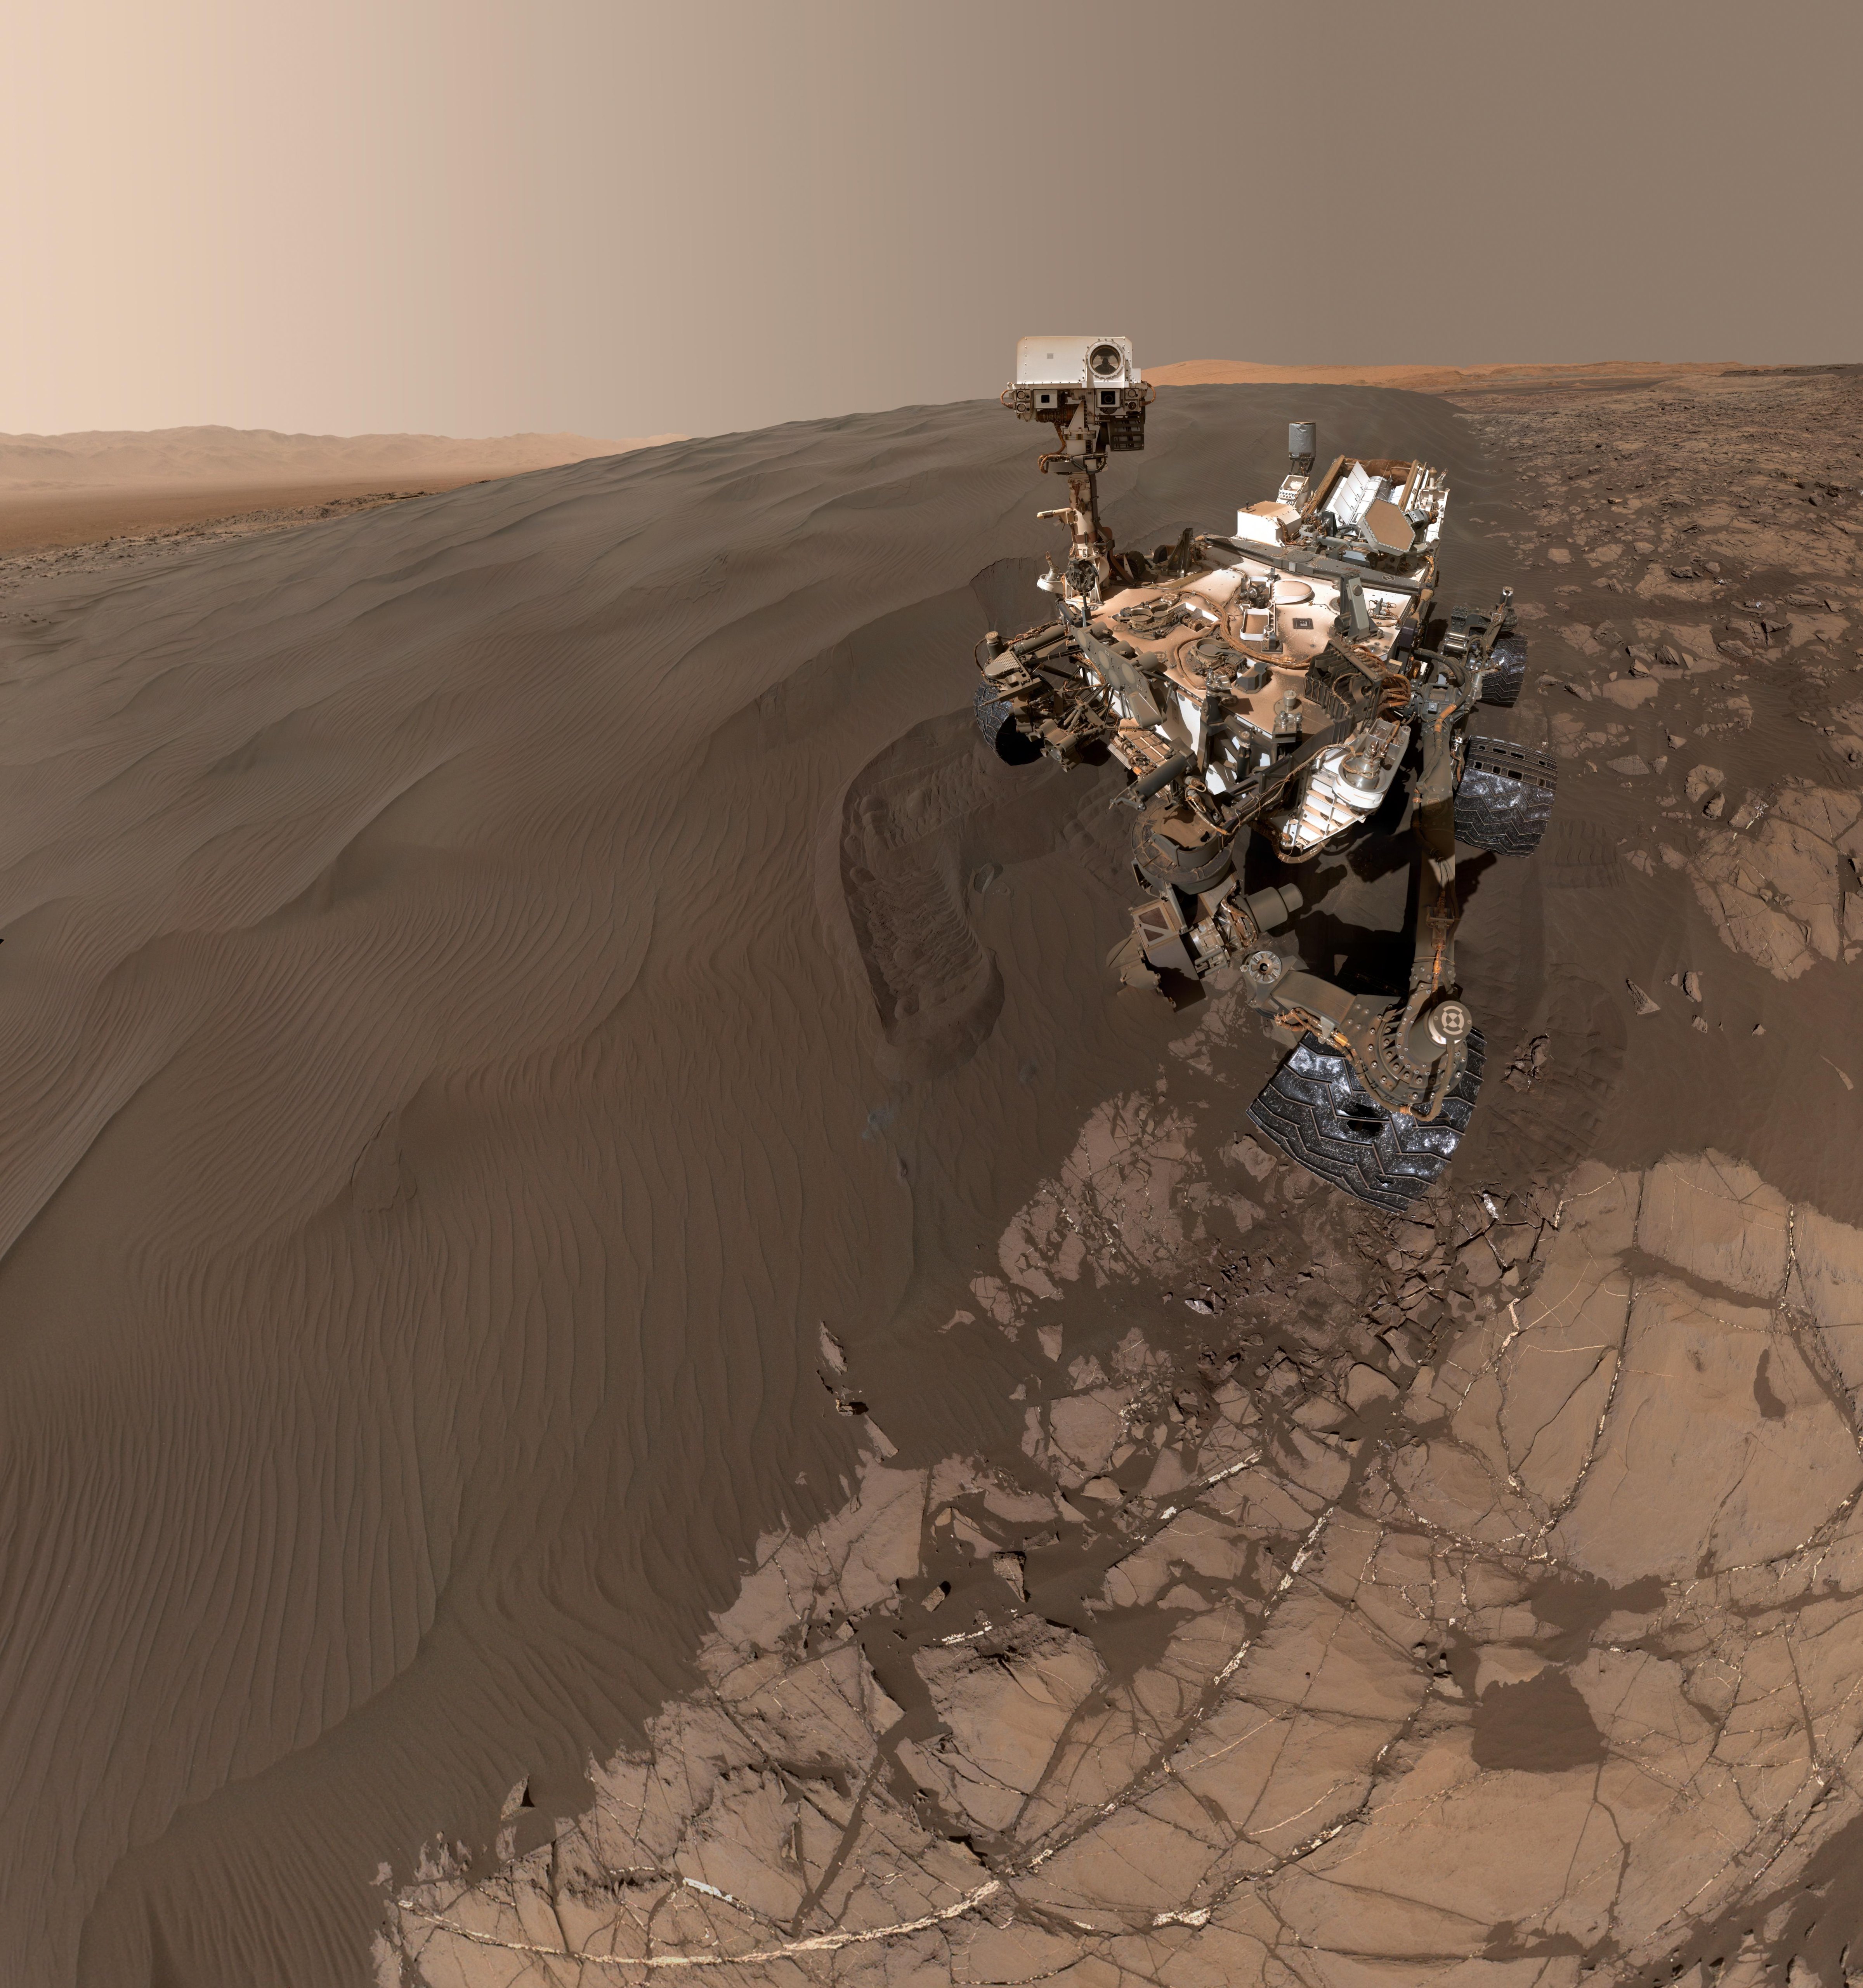 This self-portrait of NASA's Curiosity Mars rover shows the vehicle at "Namib Dune," where the rover's activities included scuffing into the dune with a wheel and scooping samples of sand for laboratory analysis. (NASA/JPL-Caltech/MSSS)